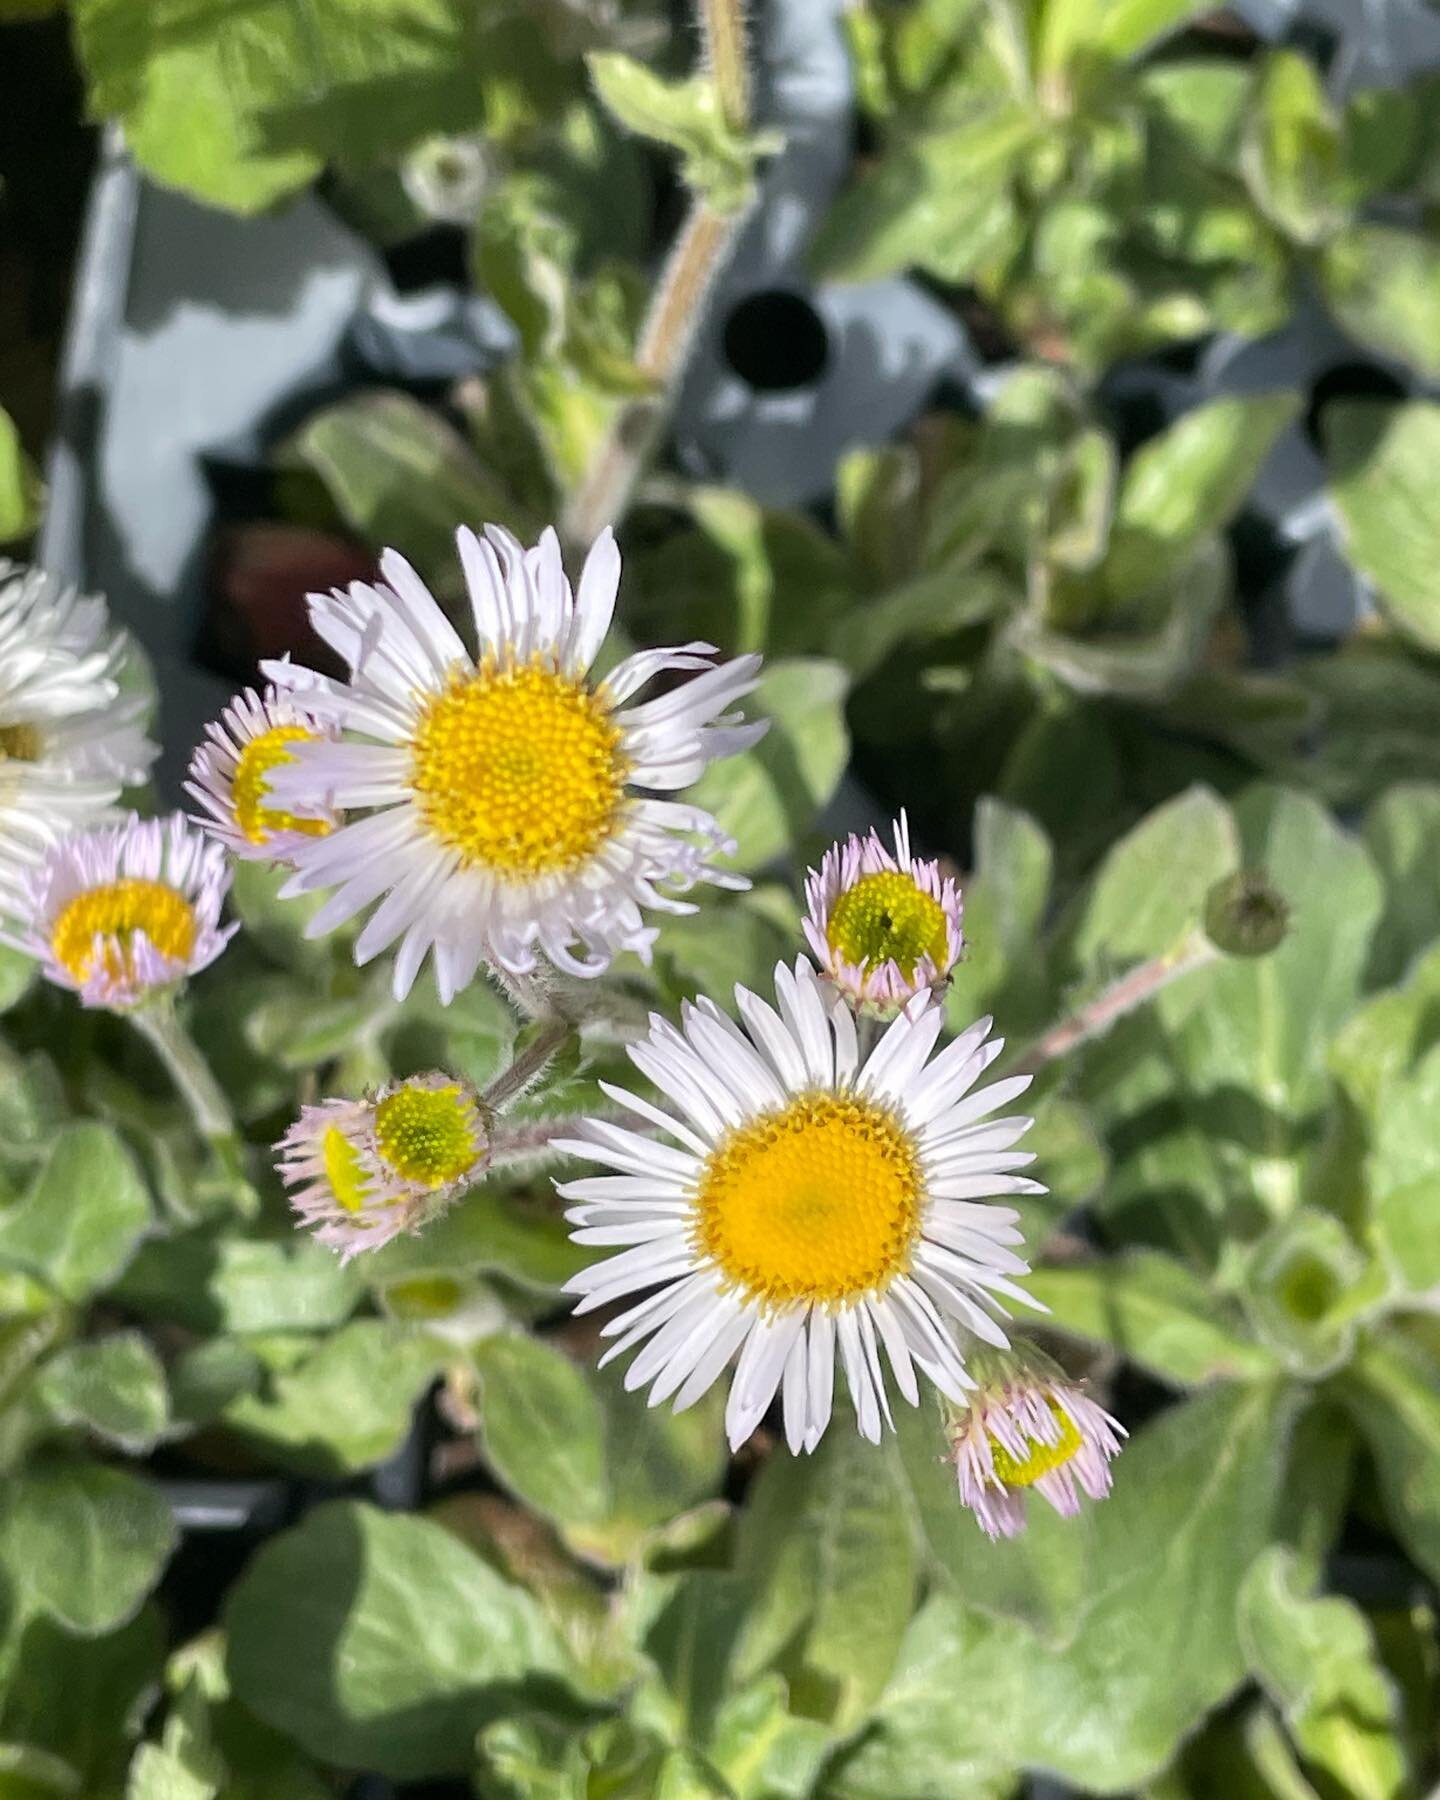 The cute faces of some of our favorite unusual native plants. 1. Erigeron pulchellus or Robin&rsquo;s Plantain. 2. Krigia biflora or Sweet Cynthia. 3. Not a native plant but a helluva cute face! #dottiedigdog #nativeplants #urbannursery